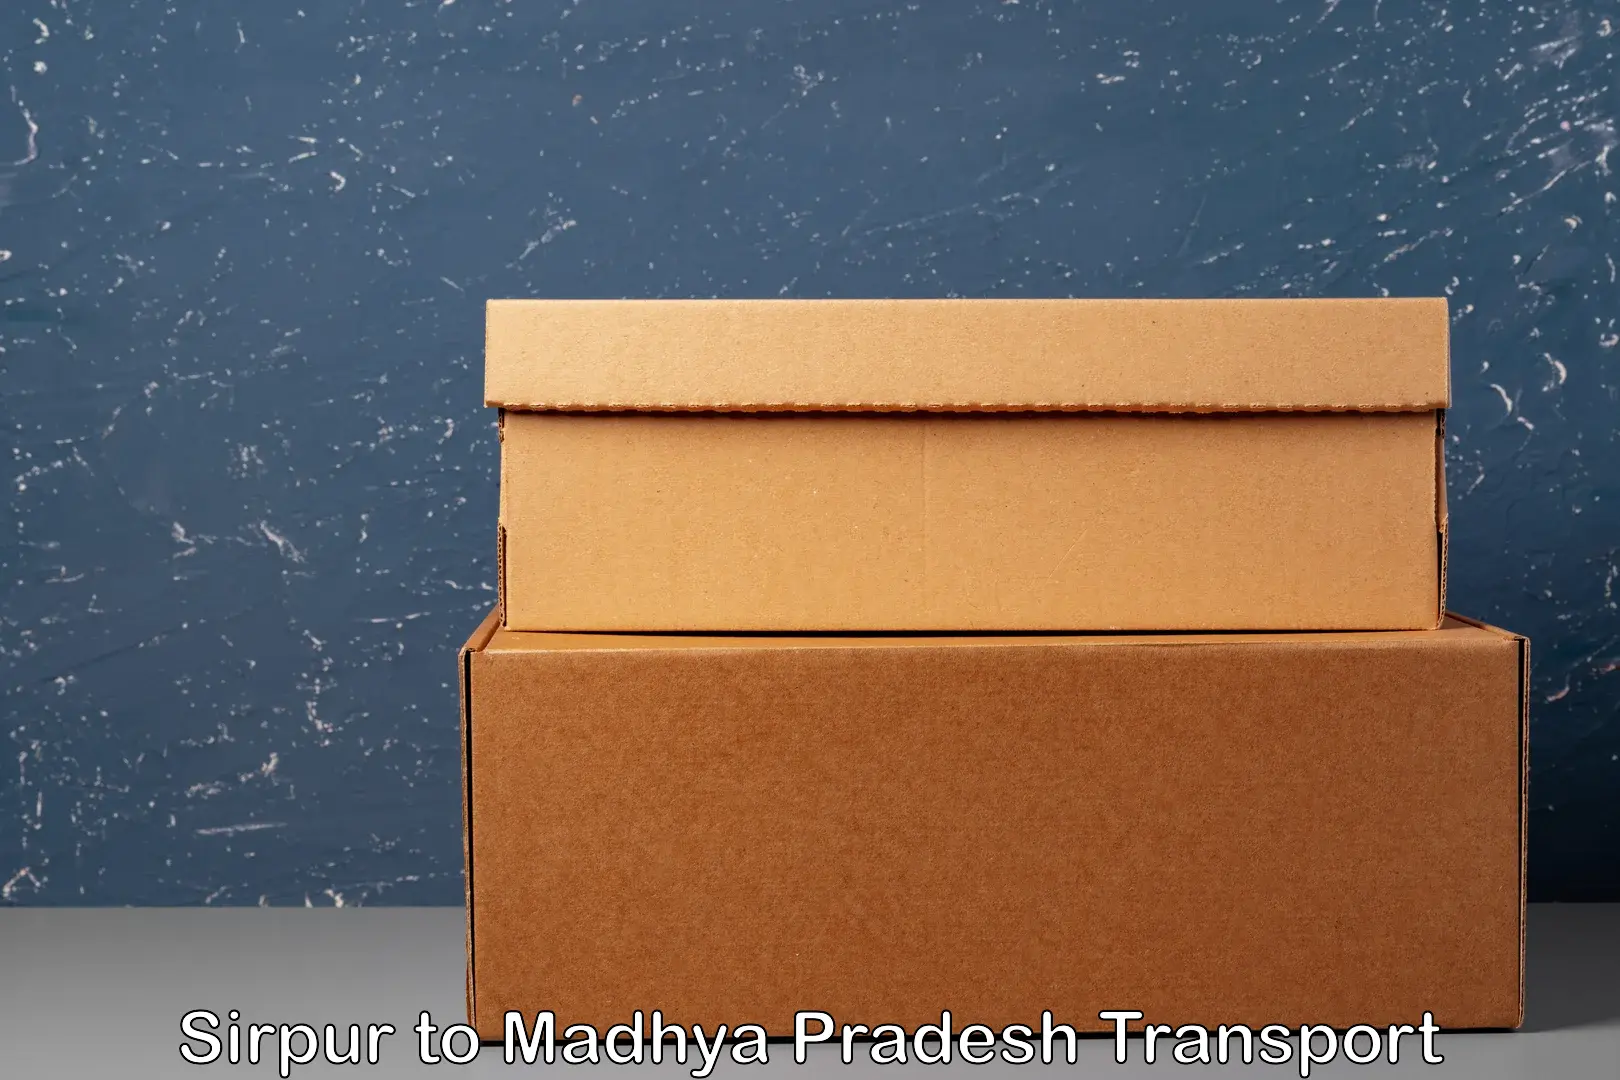 Part load transport service in India Sirpur to Madhya Pradesh